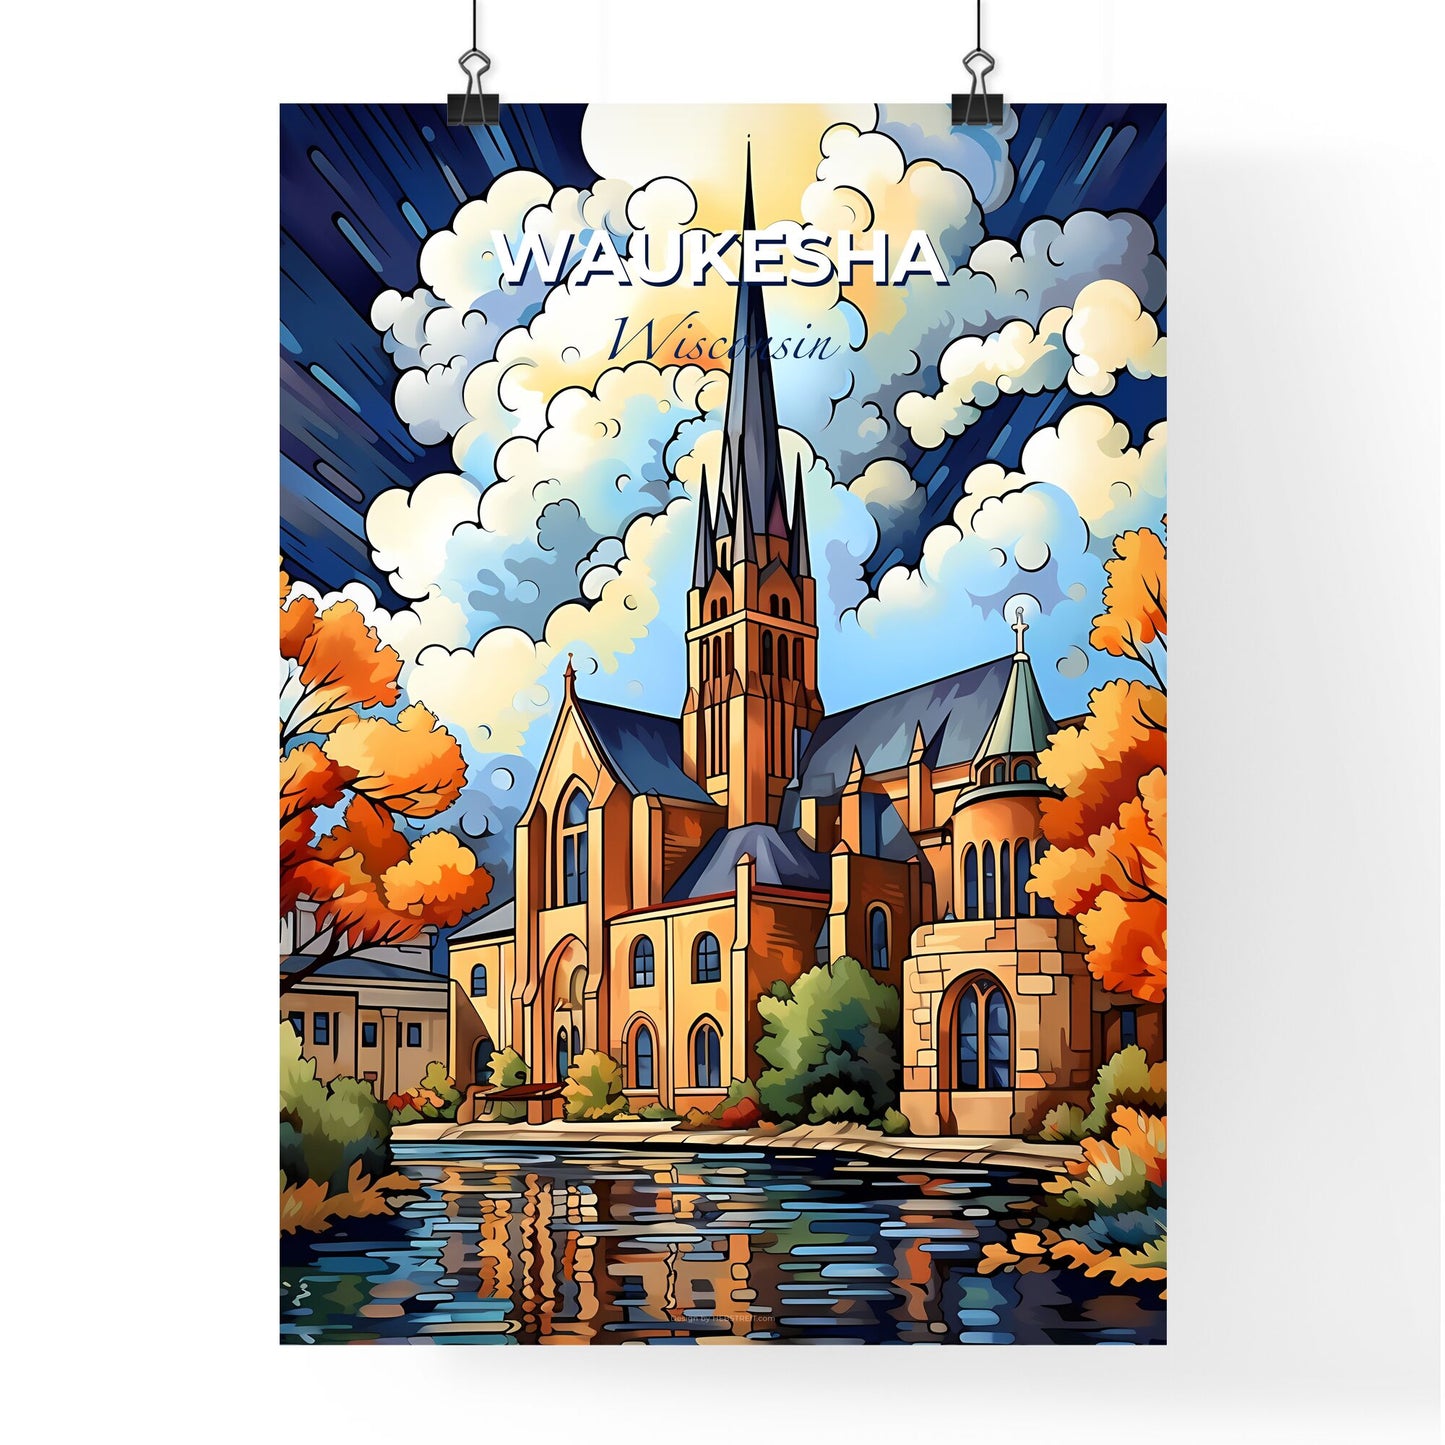 Waukesha, Wisconsin, A Poster of a painting of a church with a lake and trees Default Title